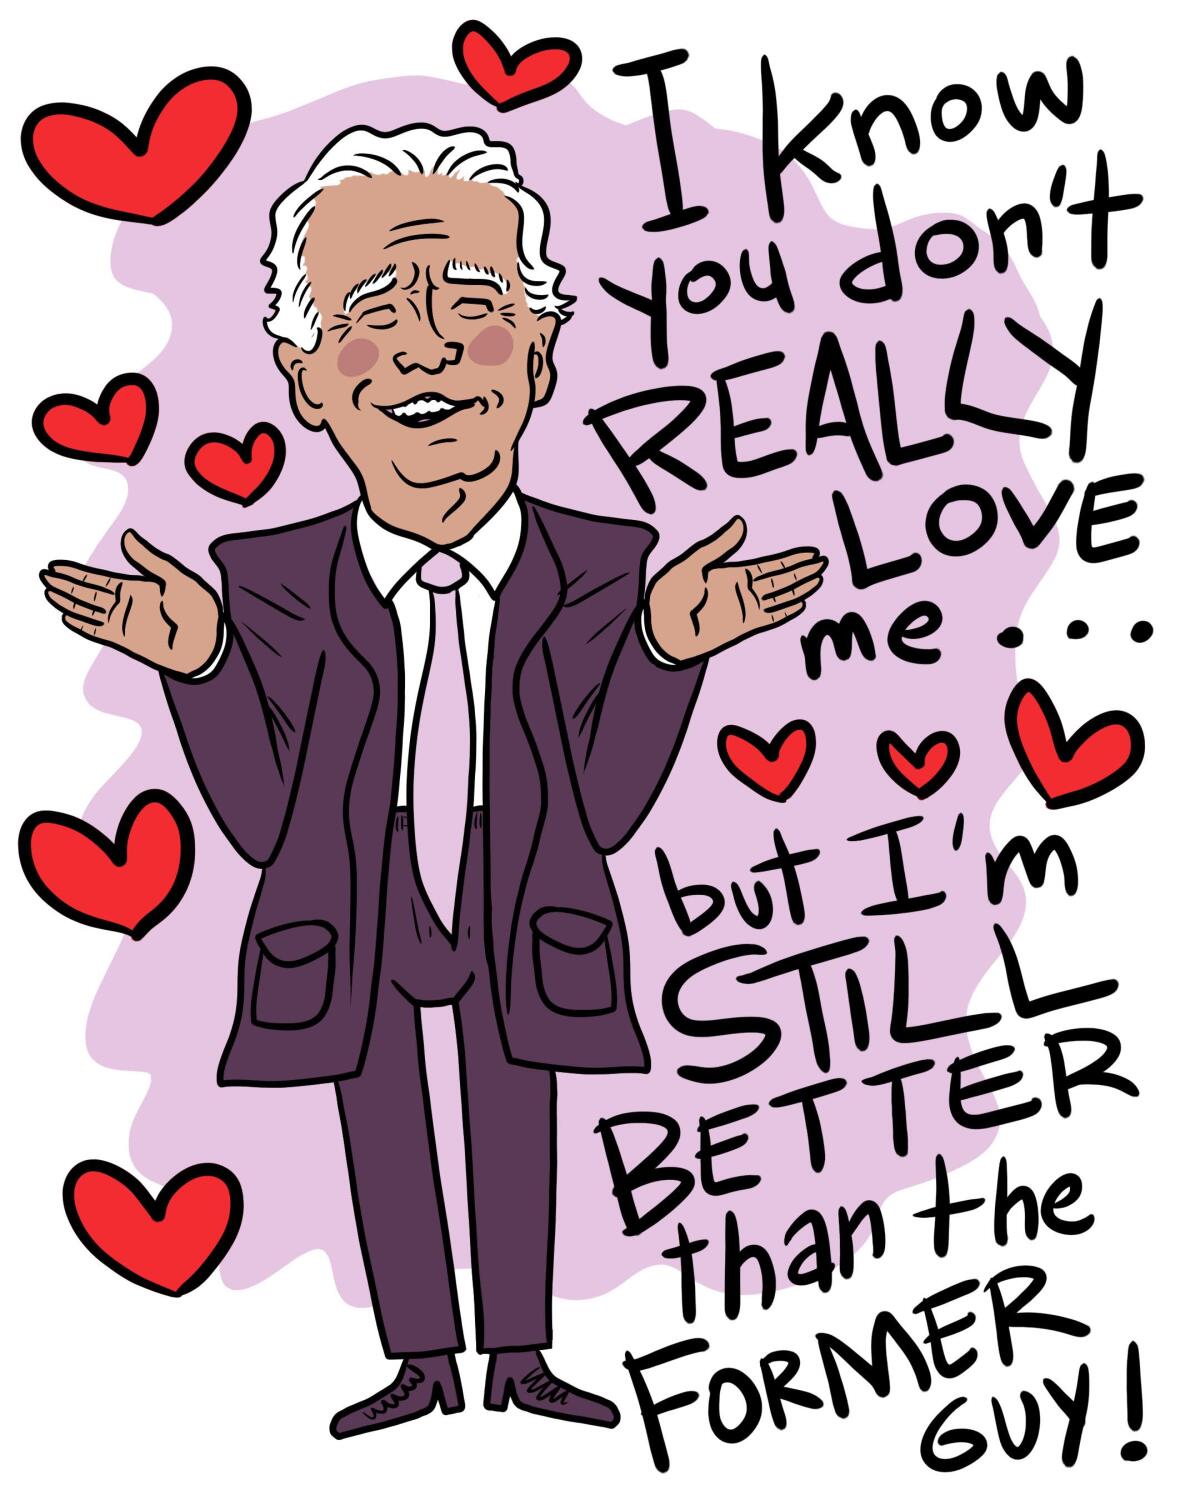 A Valentine's Day card with an illustration of President Biden.